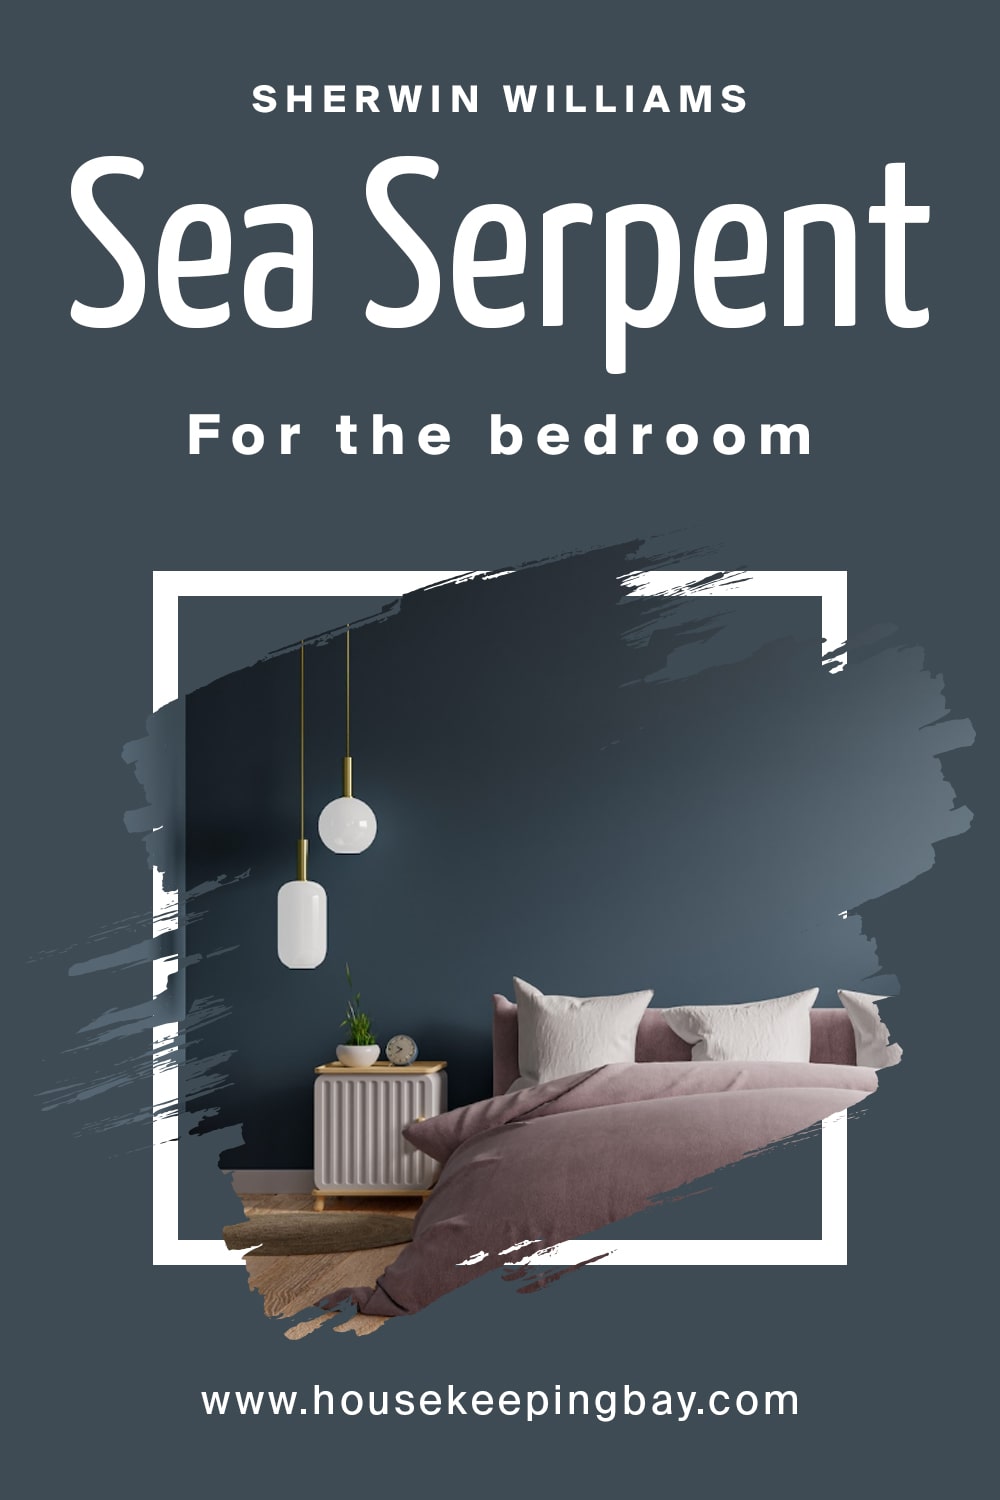 Sherwin Williams. Sea Serpent For the bedroom